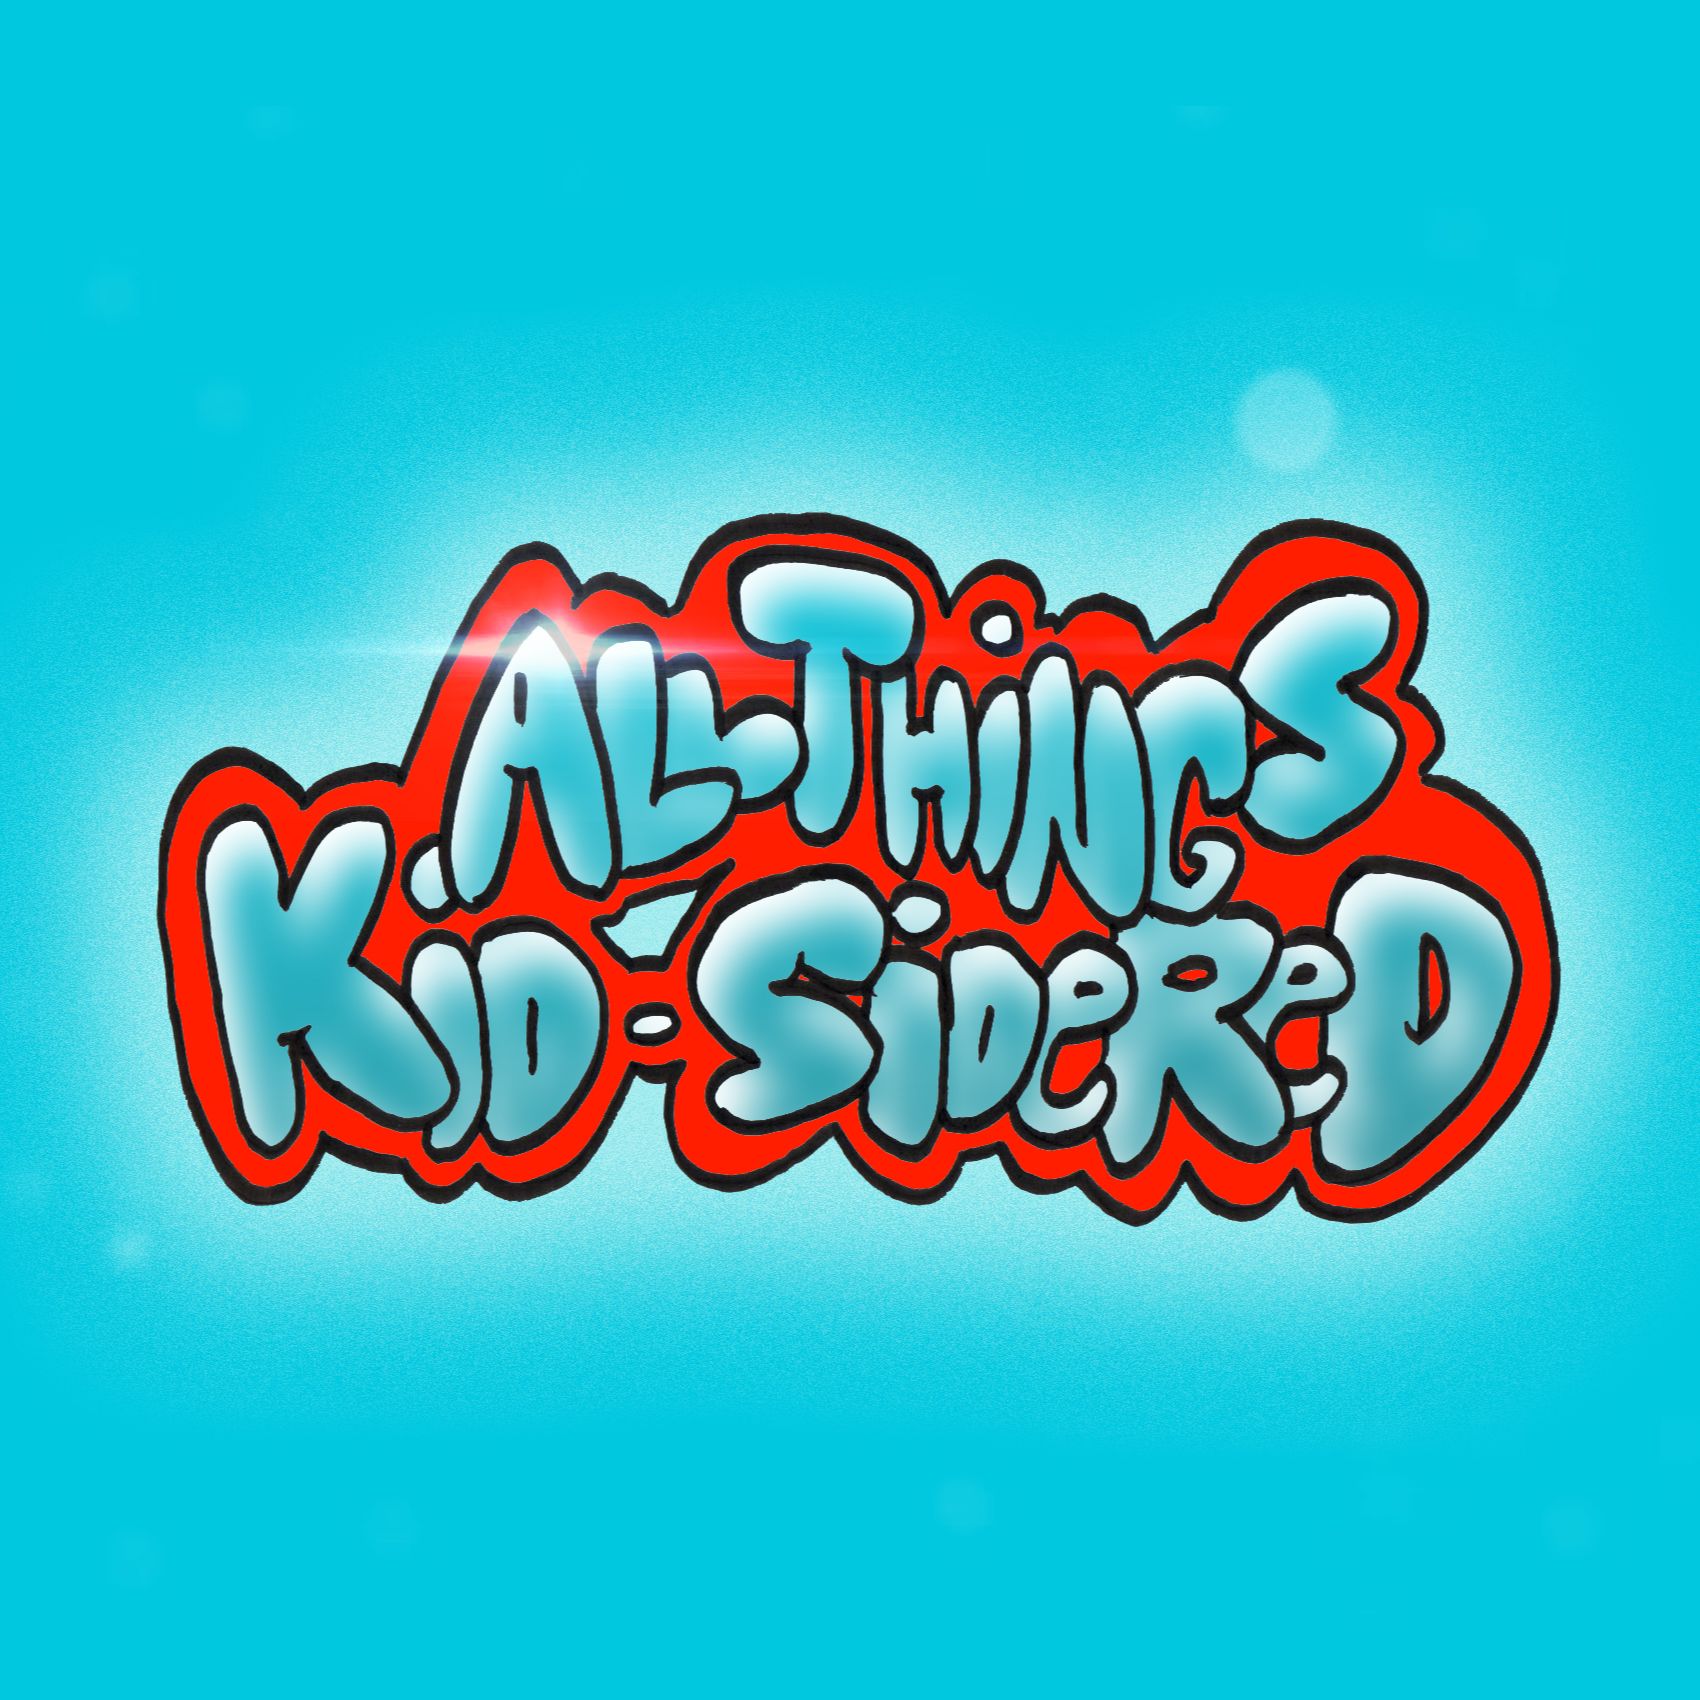 All Things Kid-Sidered